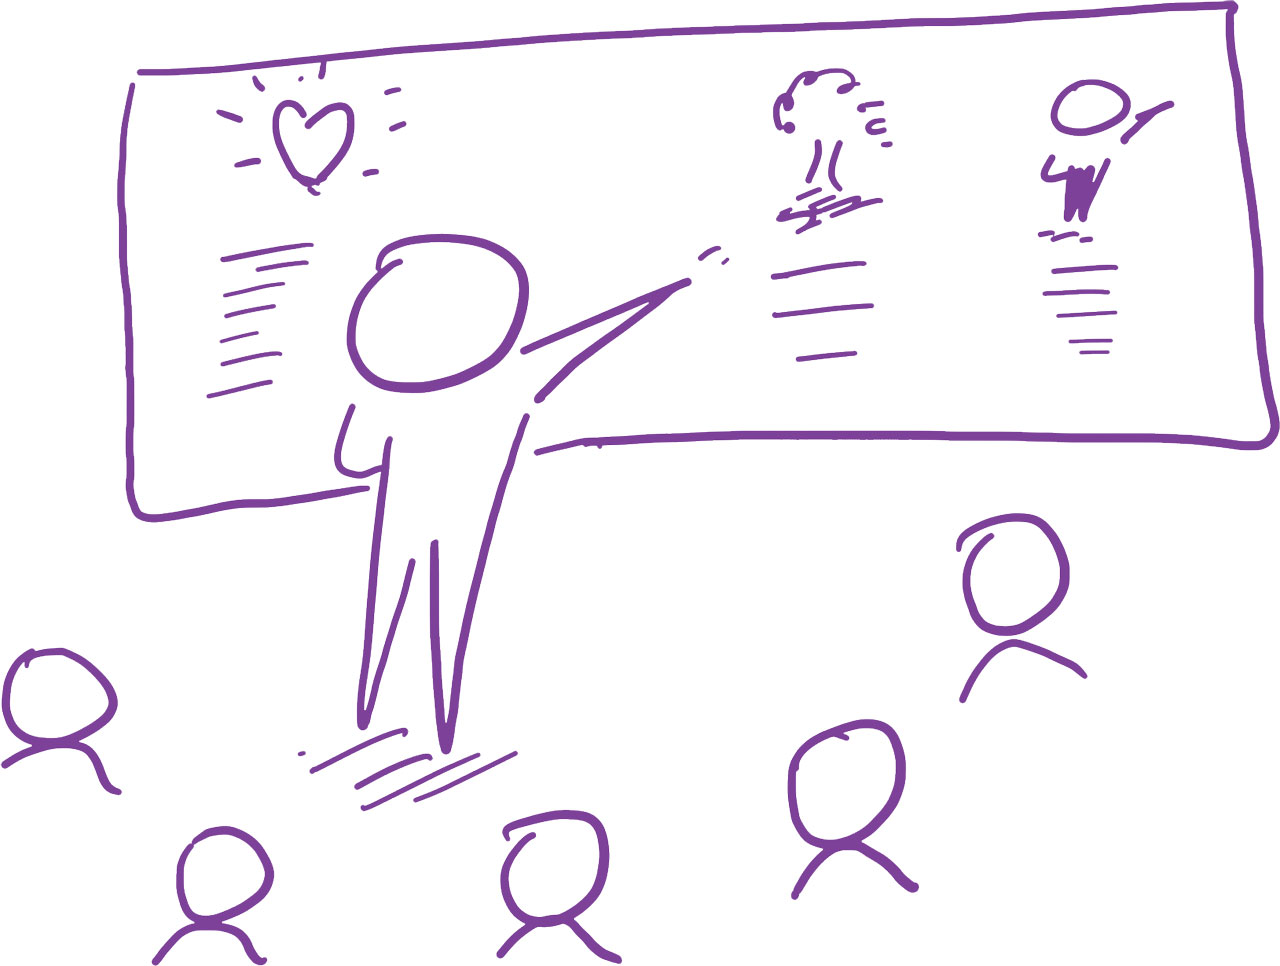 An illustration depicting the Shift Positive Live Method, with a person standing in front of others, actively gathering feedback. The individual appears engaged and responsive, demonstrating the method's emphasis on interactive communication and group feedback.